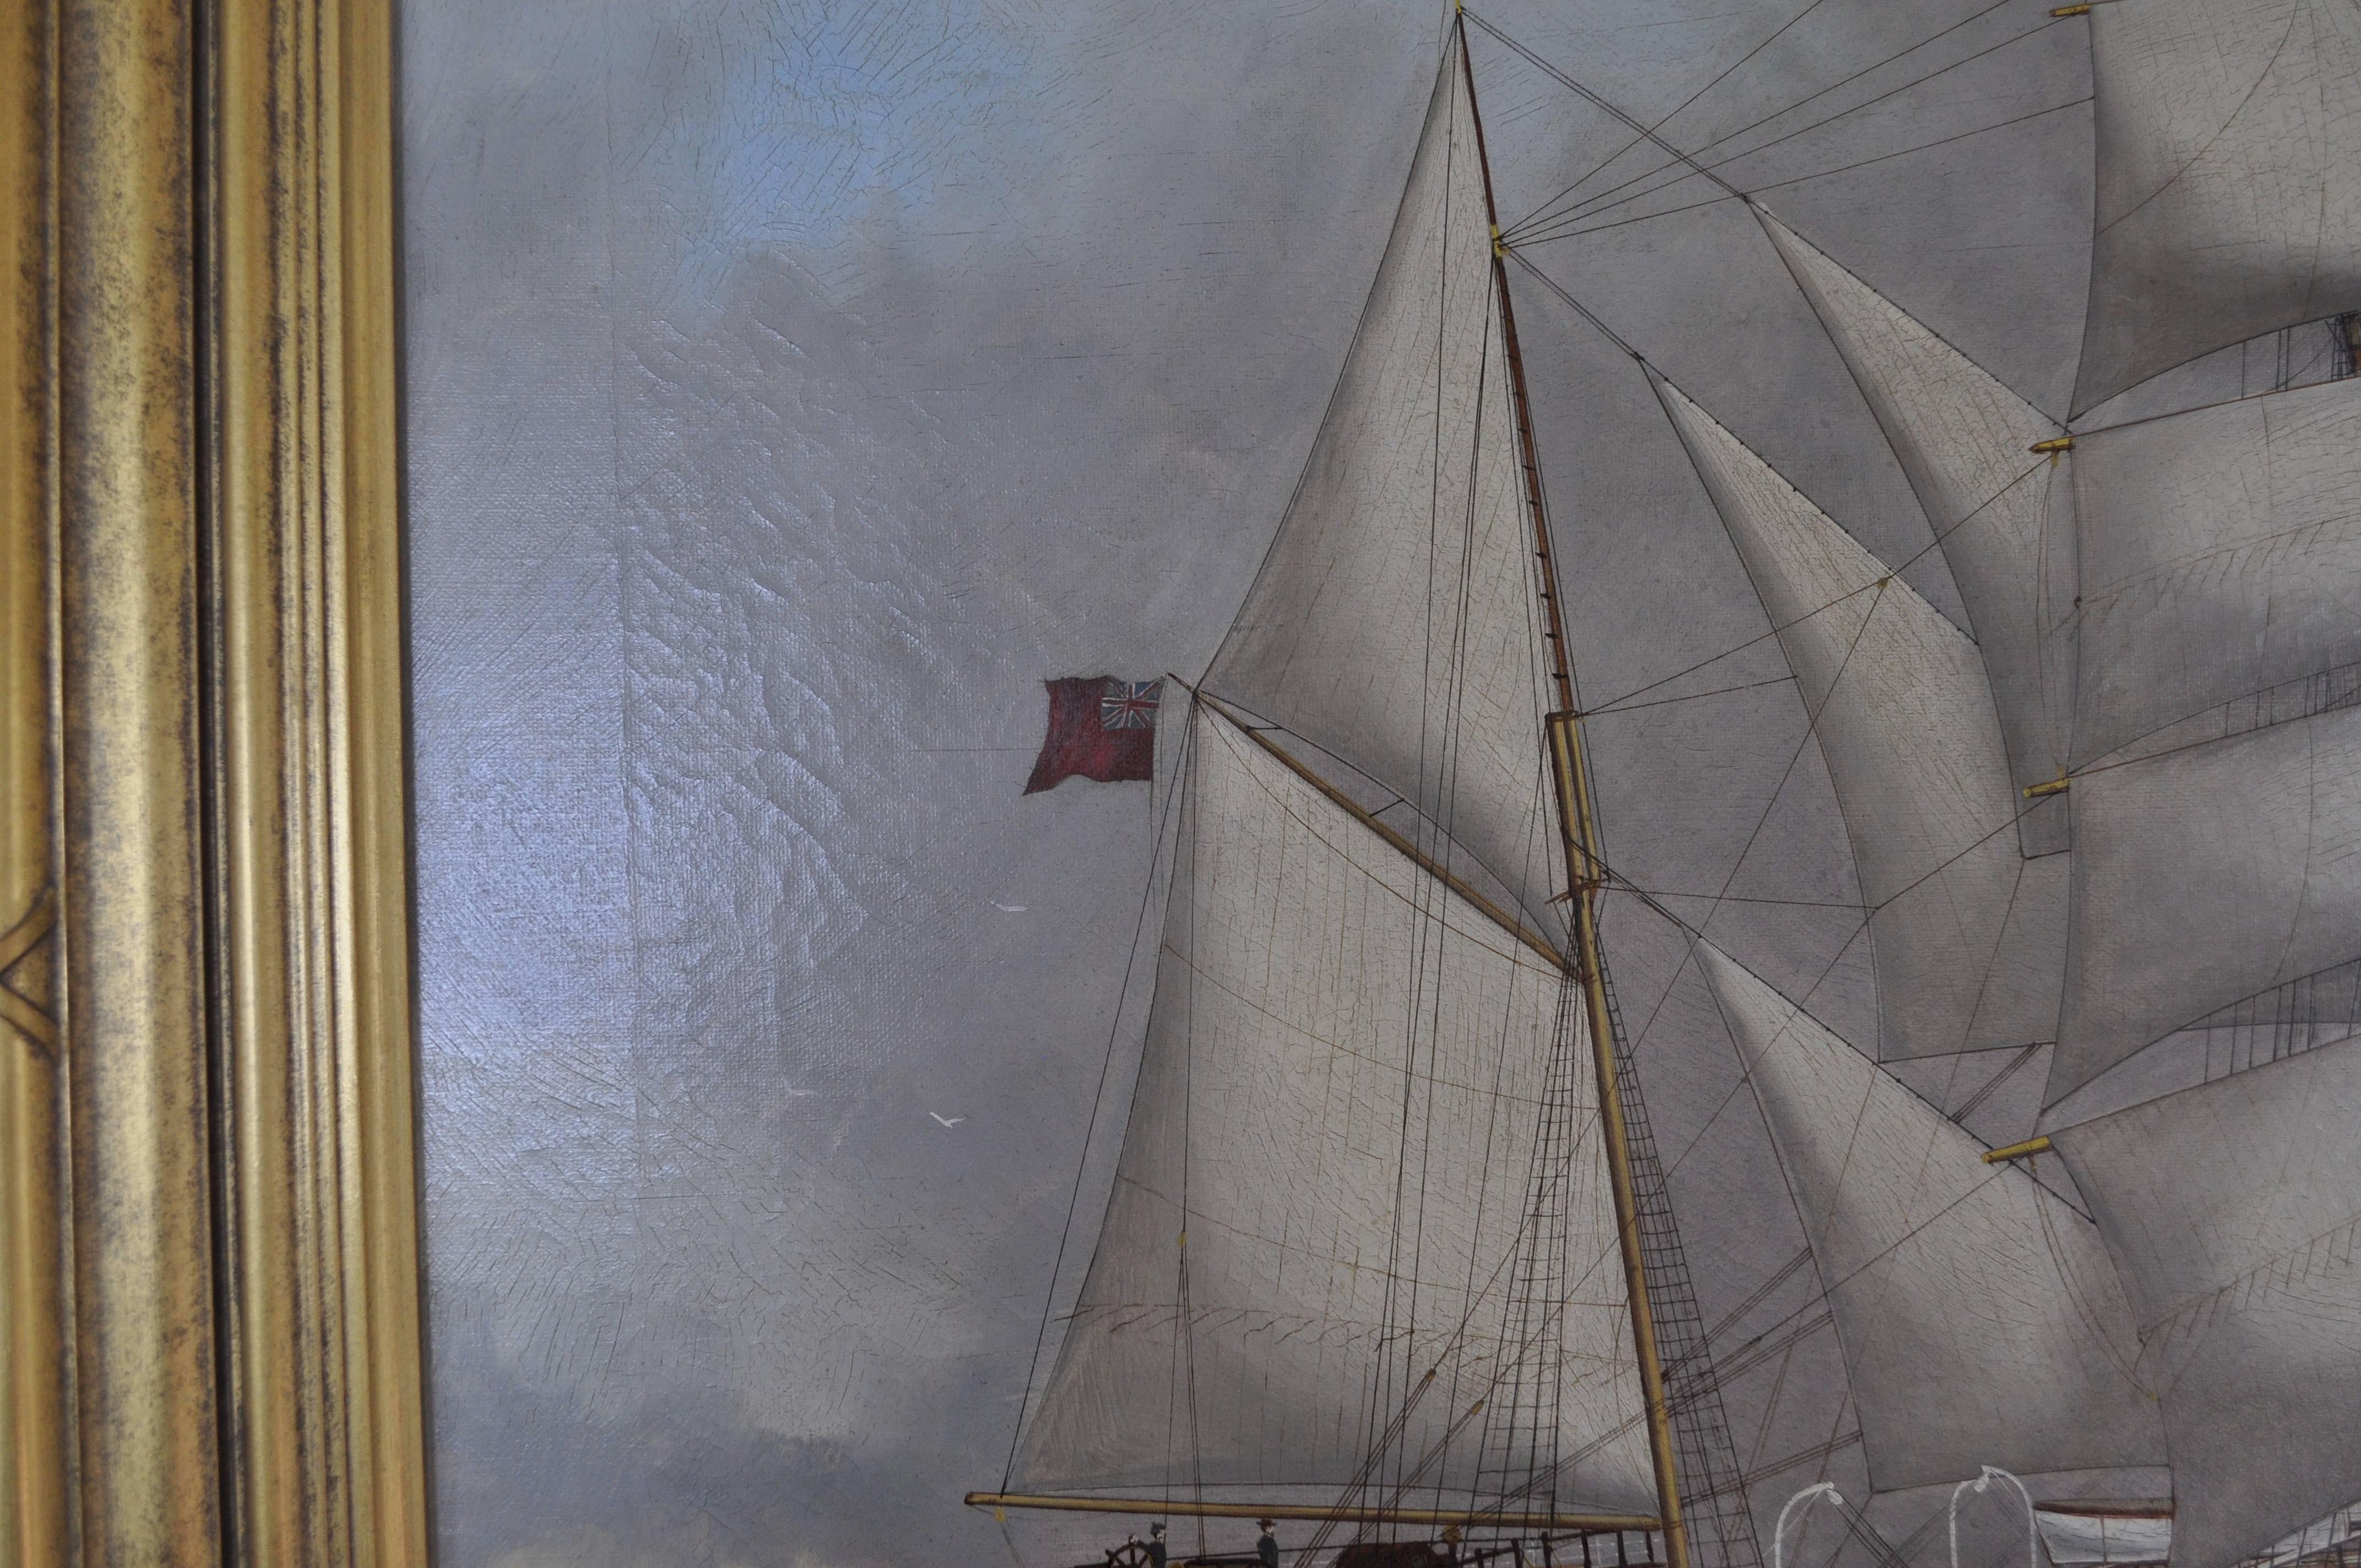 Stunning oil on canvas of the clipper ‘St Mary’s Bay’ in full sail. ‘St Mary’s Bay’ was an 1114 ton barque rigged iron vessel, built in the port of Glasgow in 1886. Her official number was 93294. She was lost in 1908 off Taltal, Chile having sailed